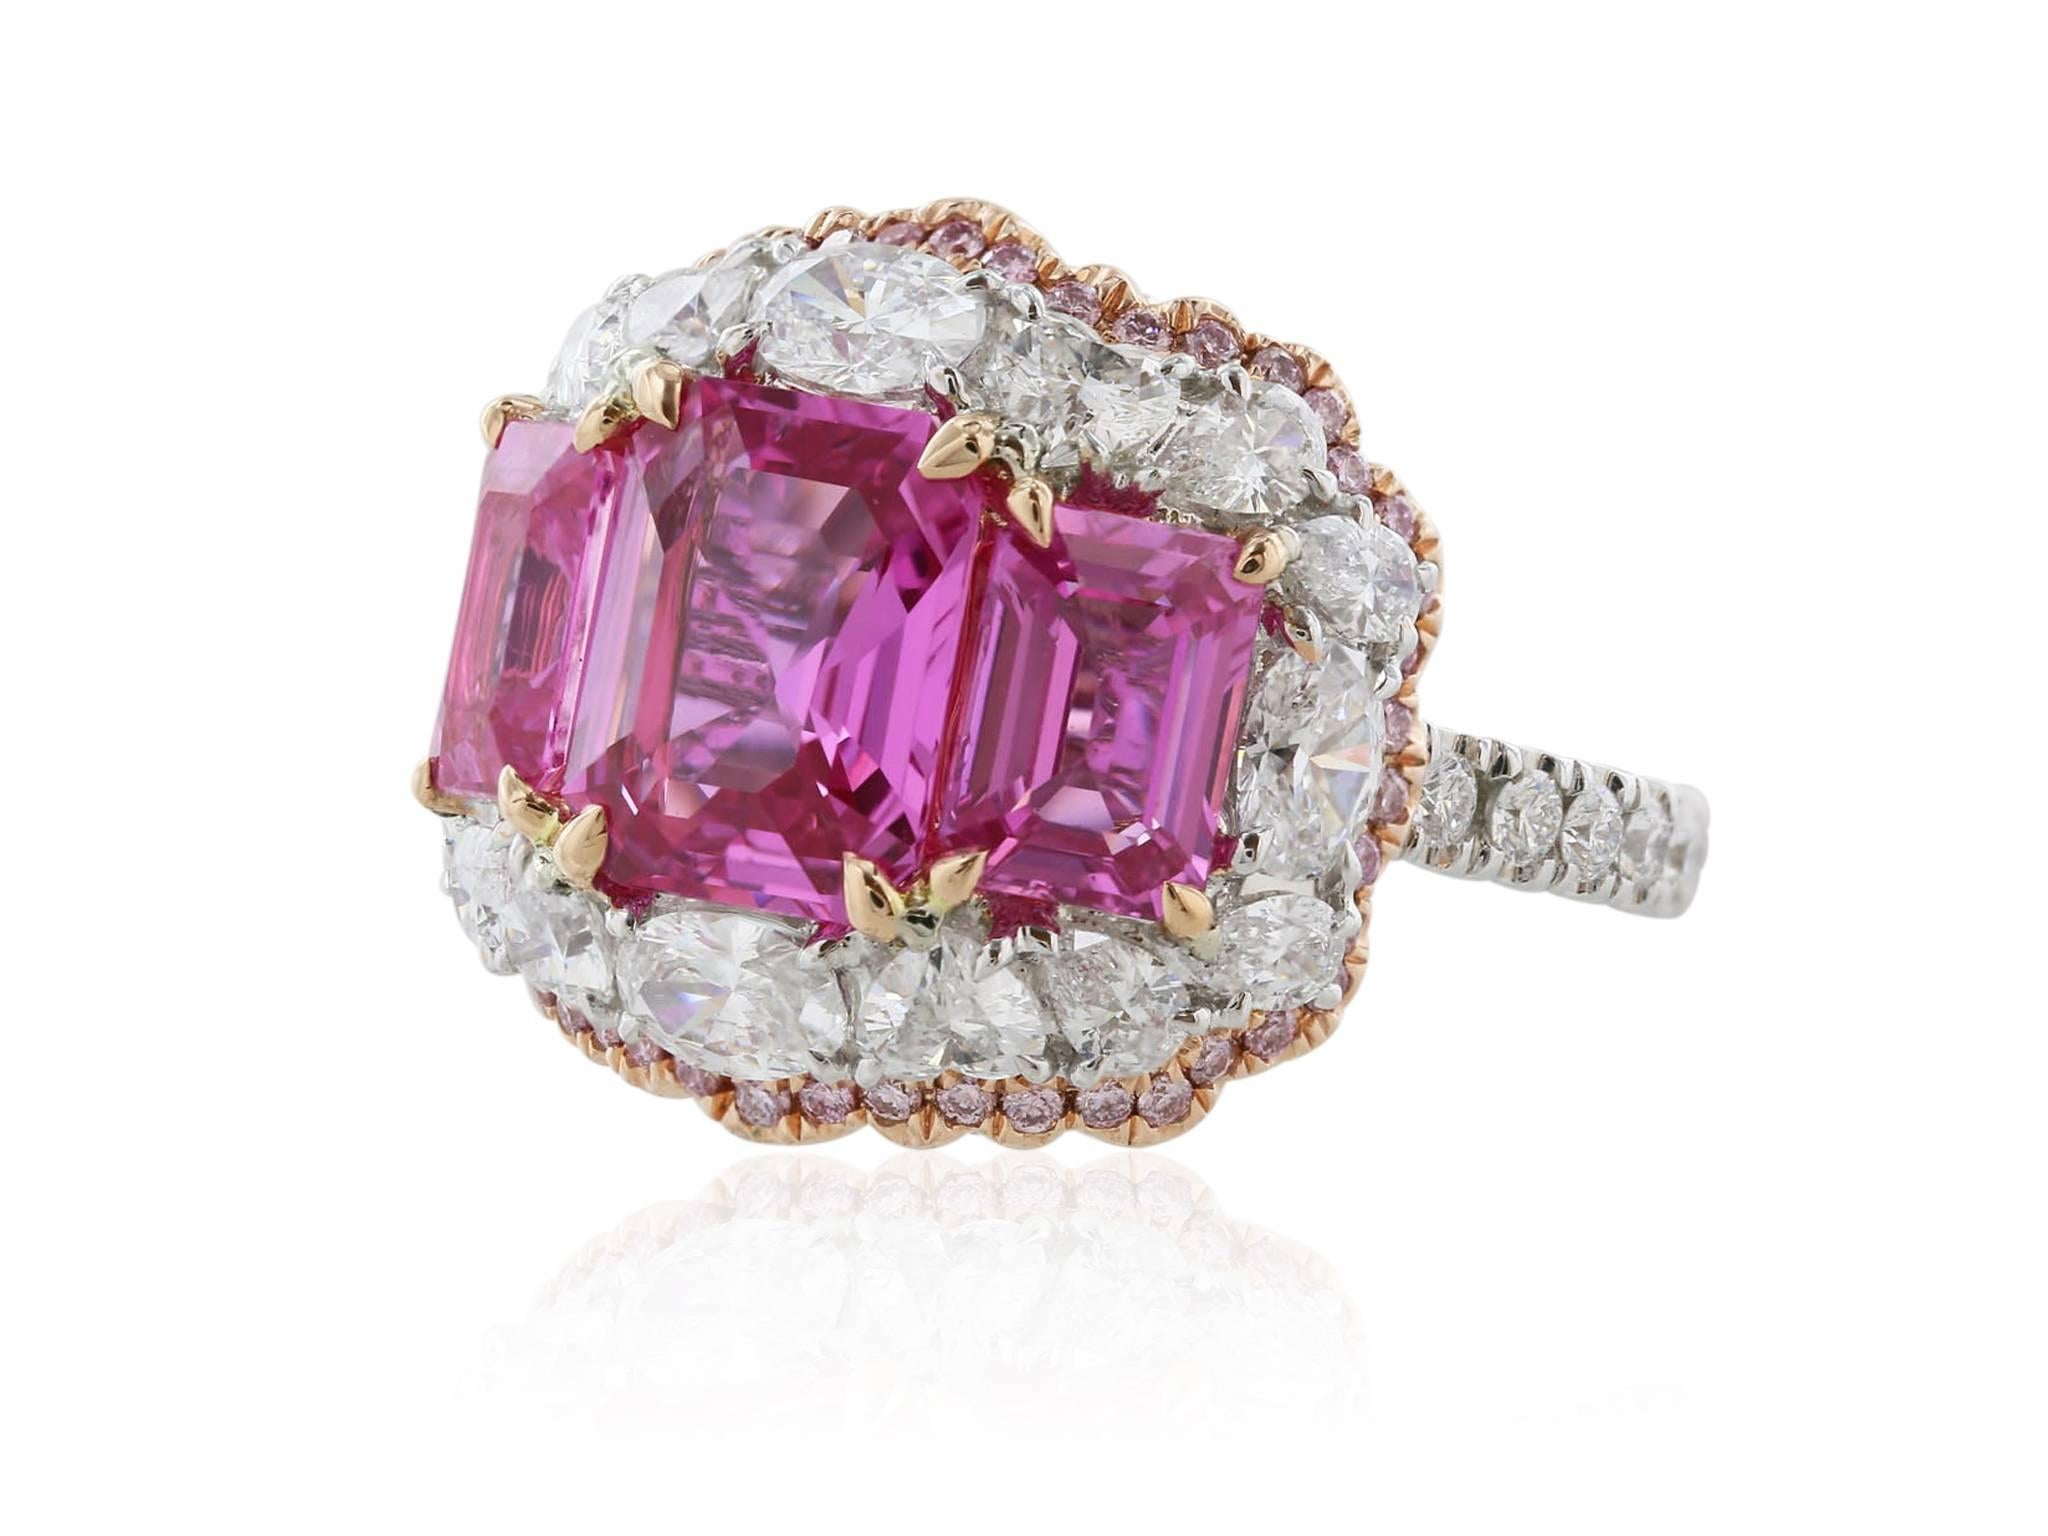 18 karat white gold custom made ring consisting of 1 asscher cut unheated pink sapphire weighing 2.91 carats, GIA 7192170427, flanked by 2 unheated pink sapphires with a total weight of 2.43 carats, GIA 1137696507 + 6132696400, surrounded by pear,